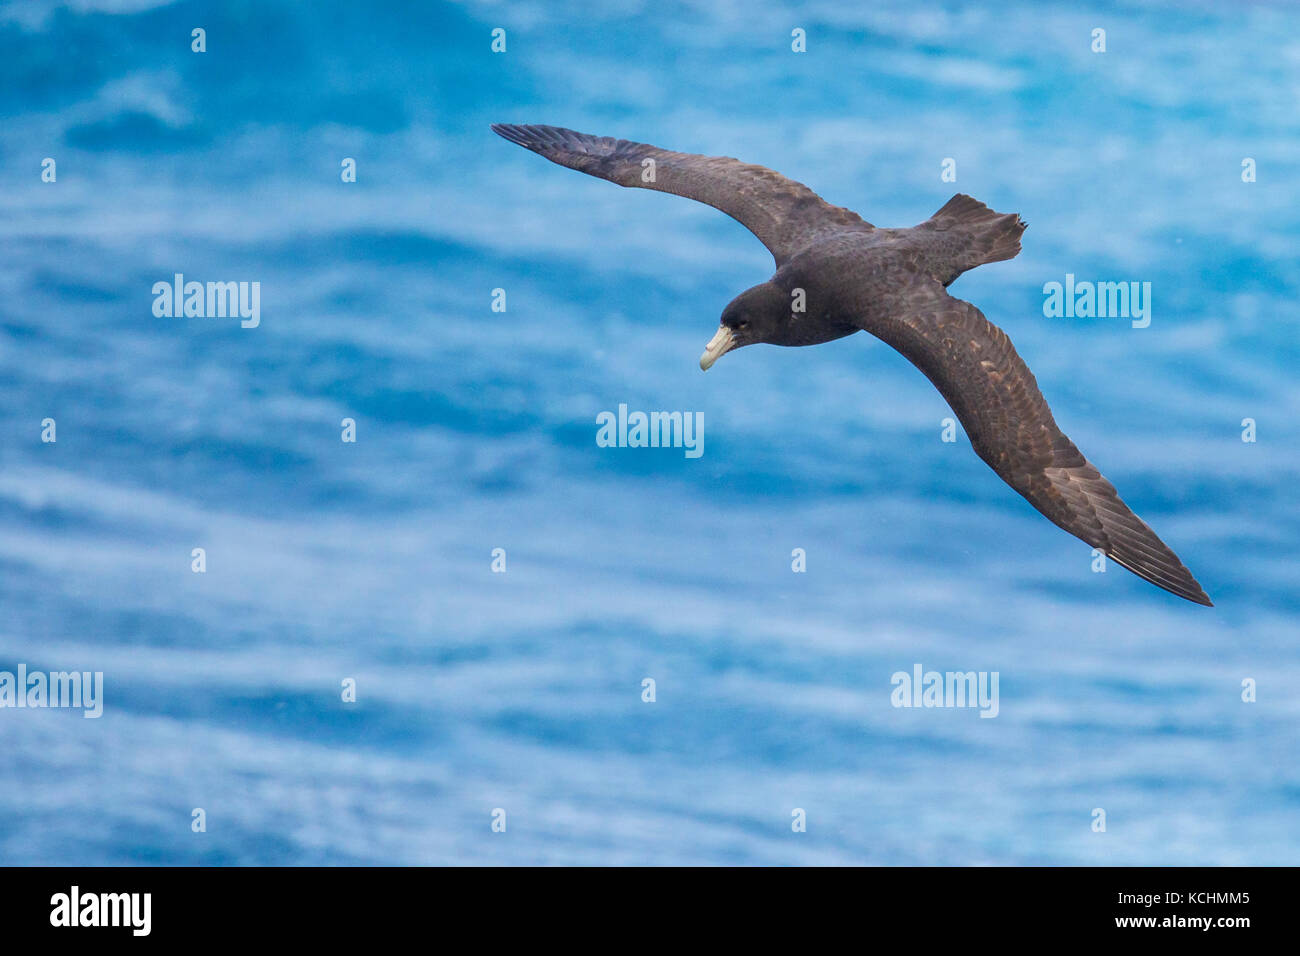 Southern Giant Petrel (Macronectes giganteus) flying over the ocean searching for food near South Georgia Island. Stock Photo